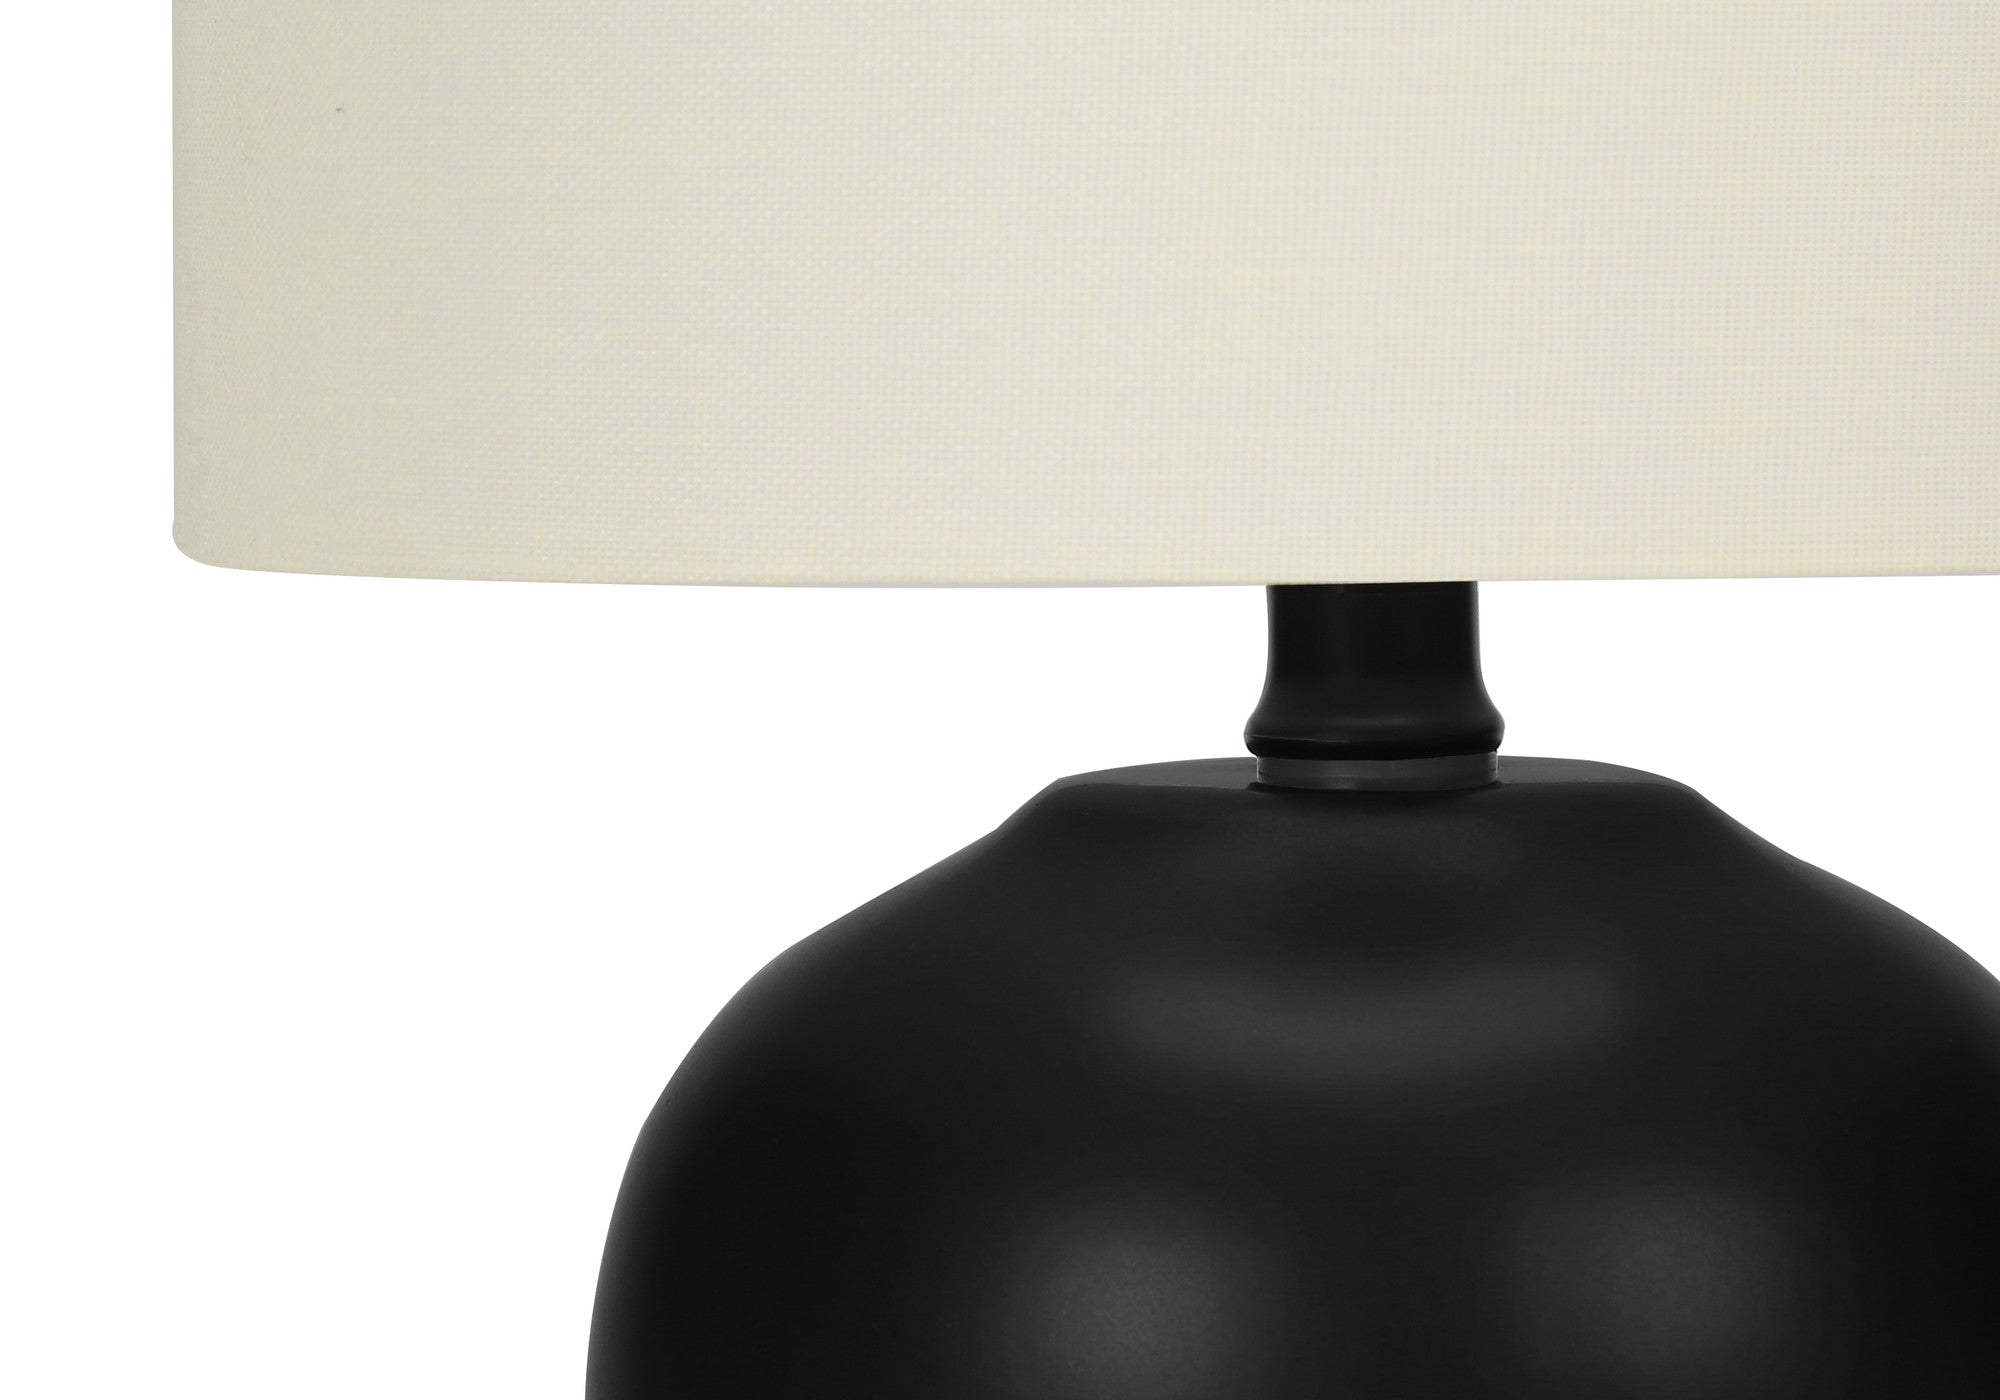 17" Black Ceramic Round Table Lamp With Ivory Drum Shade